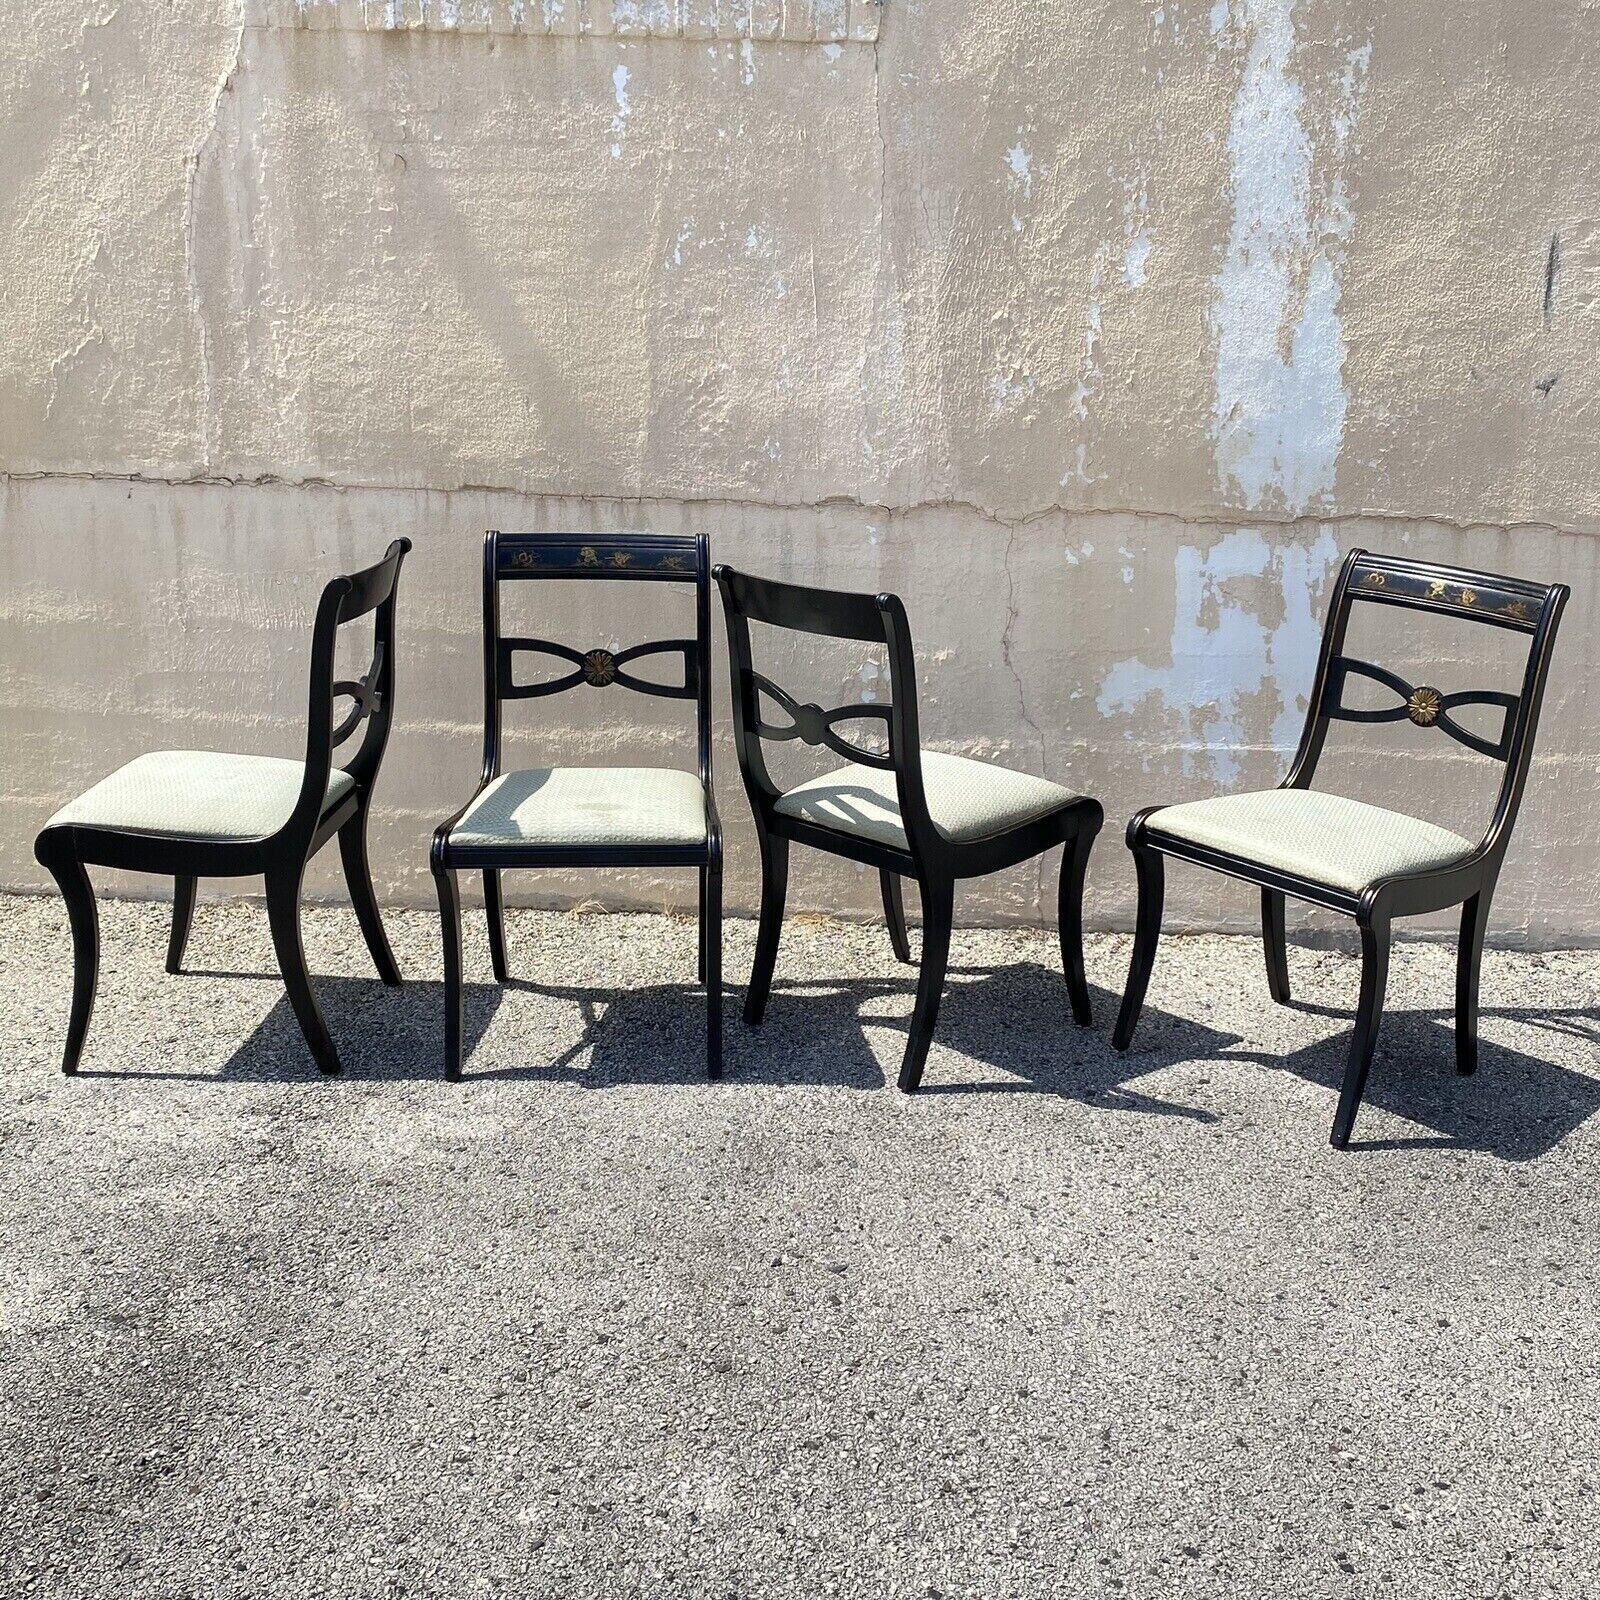 Vintage Chinoiserie Black Painted Asian Regency Style Dining Chairs - Set of 4 3